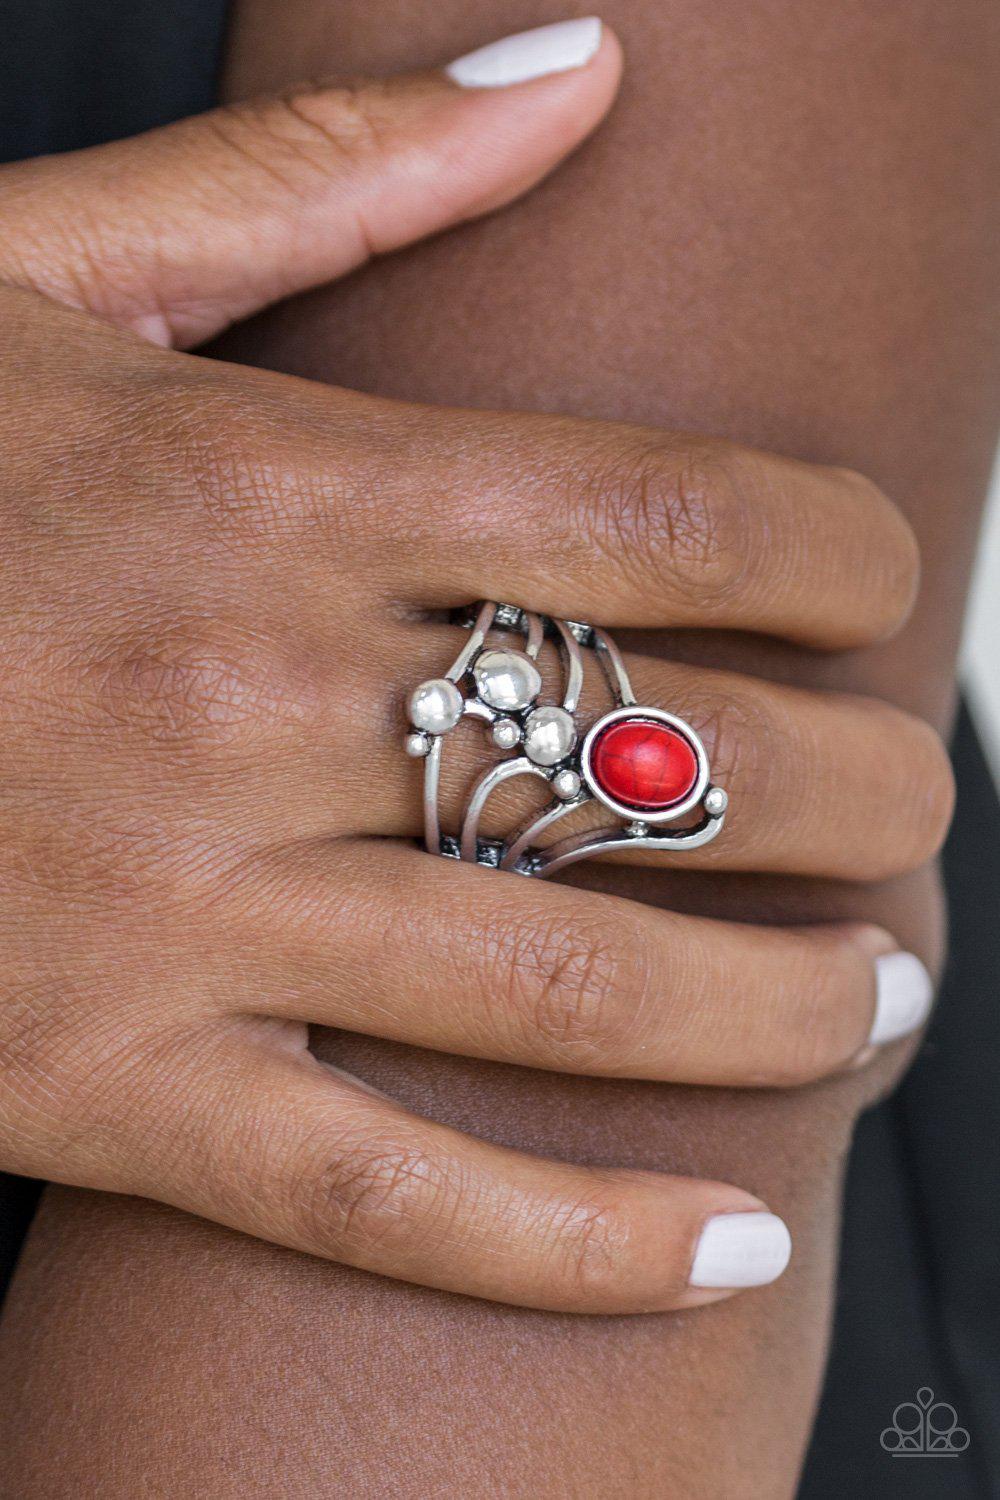 Wanderlust Wanderer Silver and Red Stone Ring - Paparazzi Accessories-CarasShop.com - $5 Jewelry by Cara Jewels